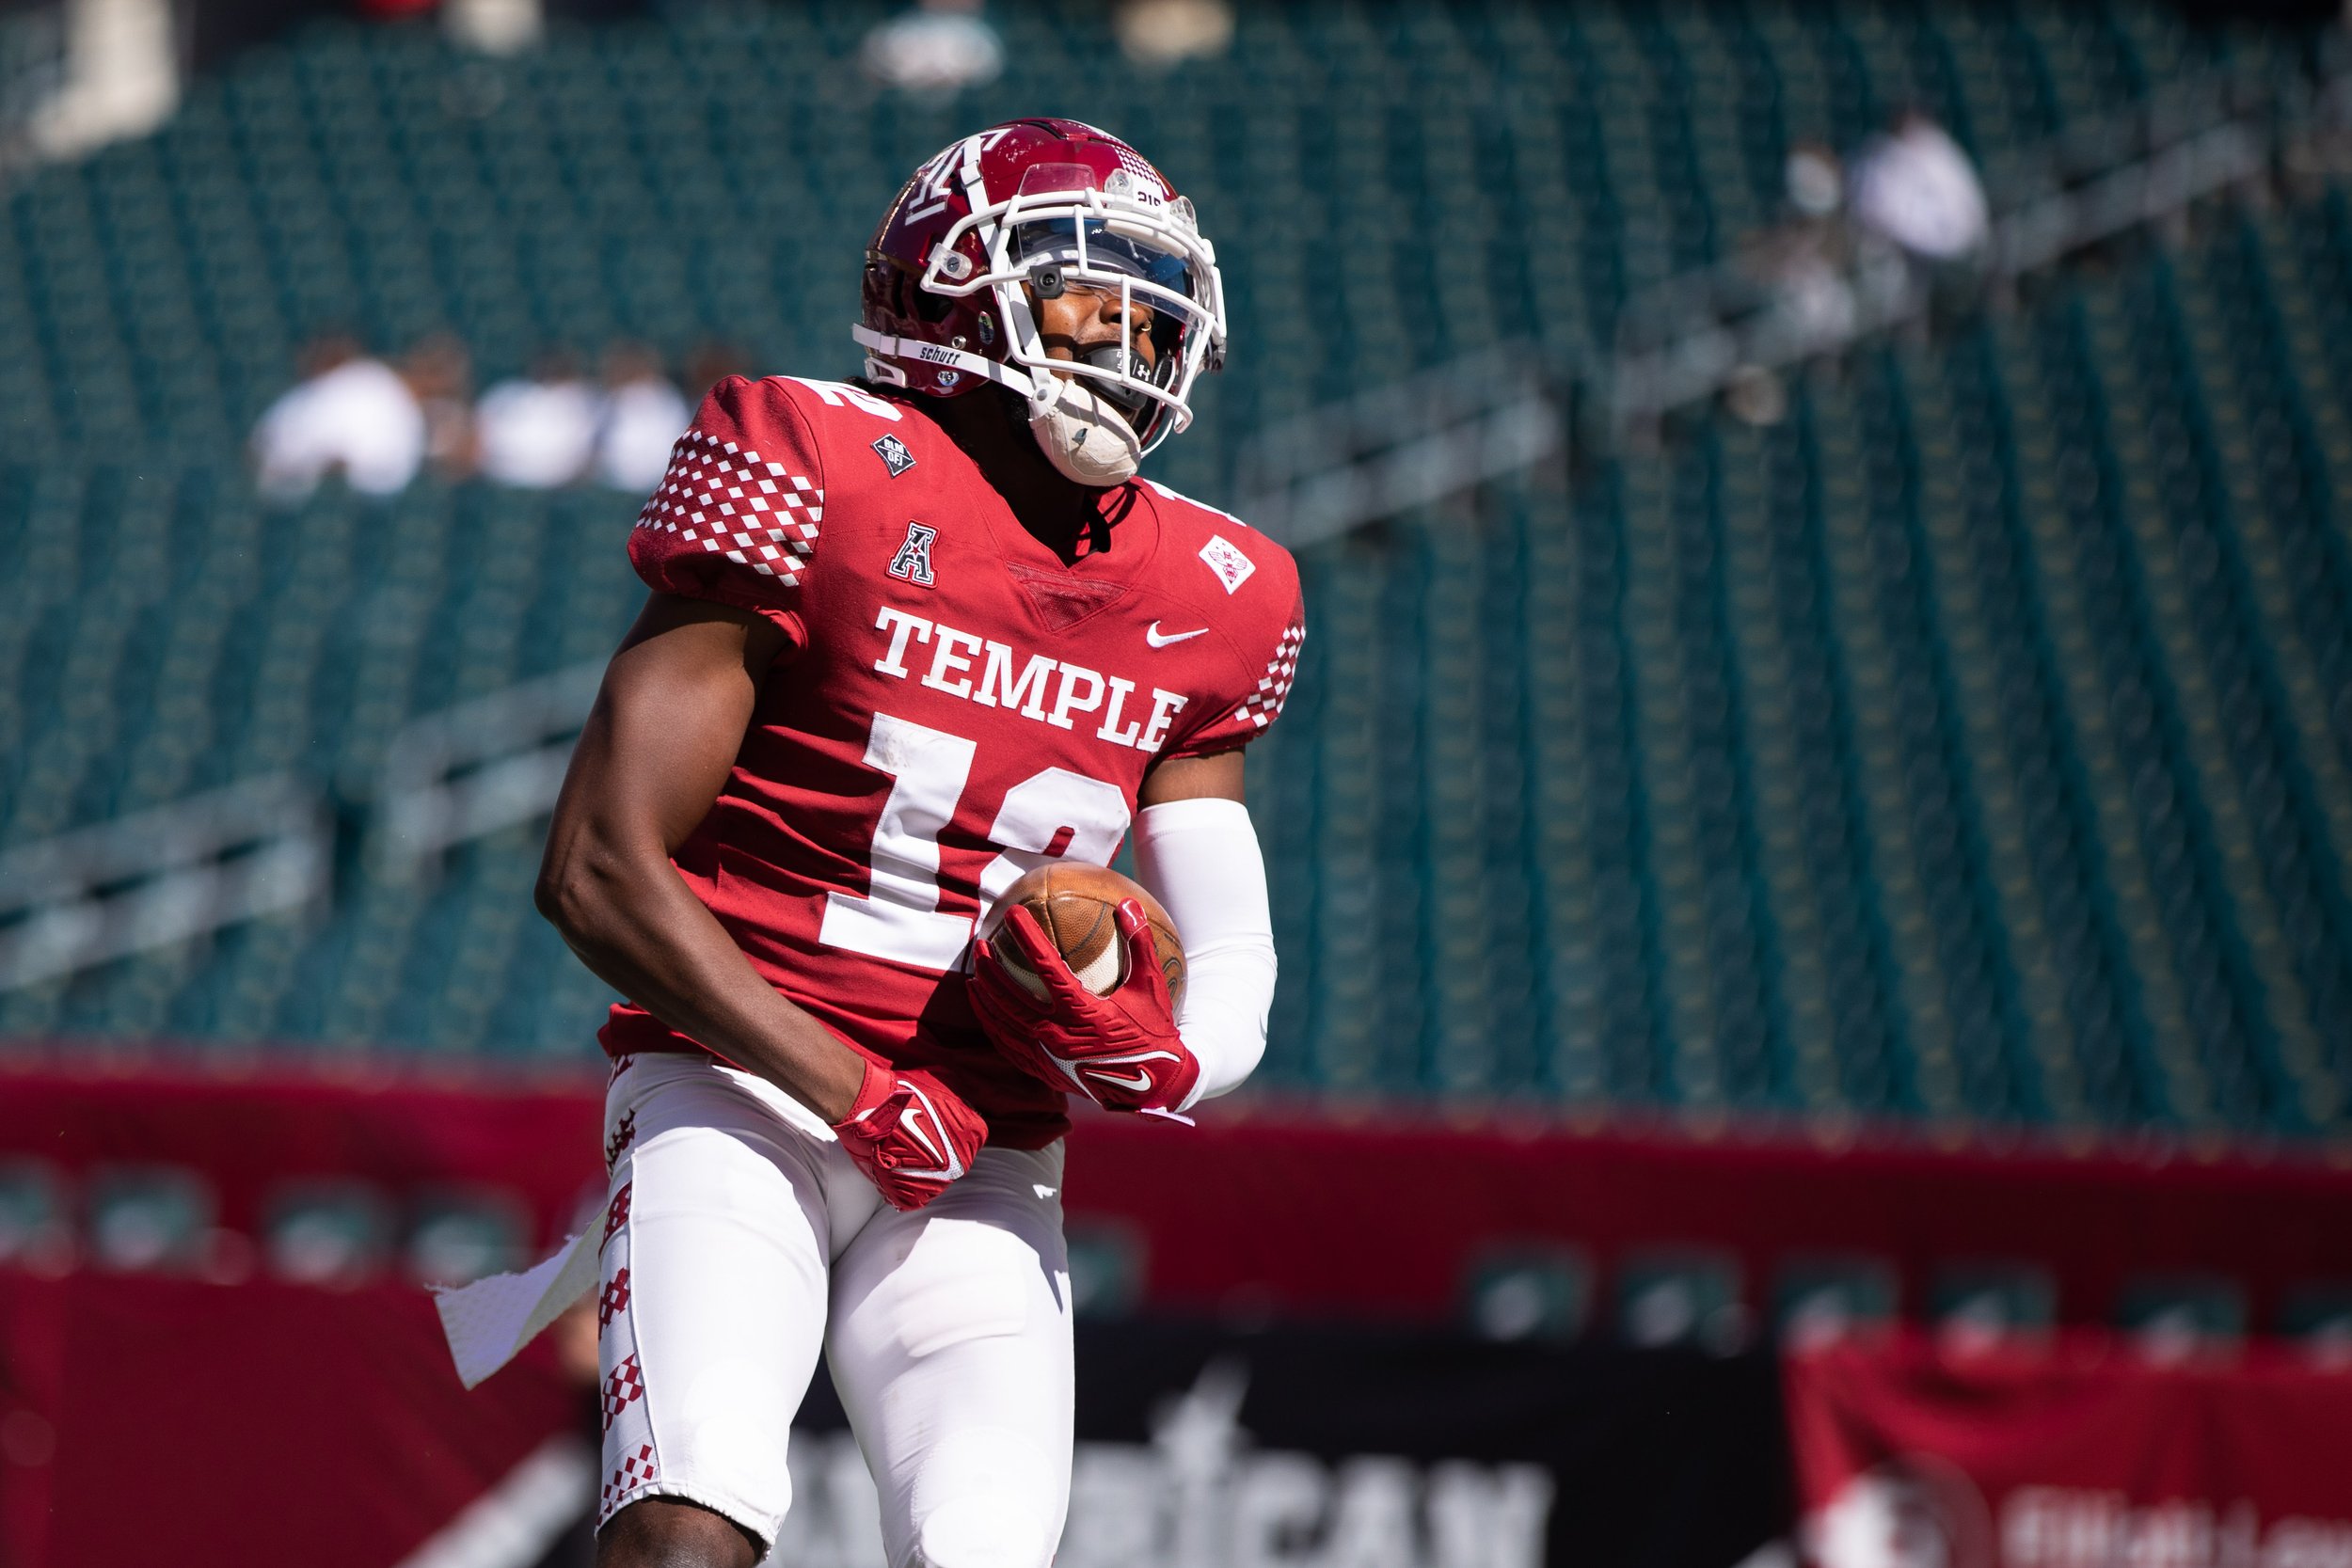   Kadas Reams, Temple University sophomore wide receiver, celebrates after he scores a touchdown during a Temple Owls game against Wagner College at Lincoln Financial Field on Sept. 25, 2021.  